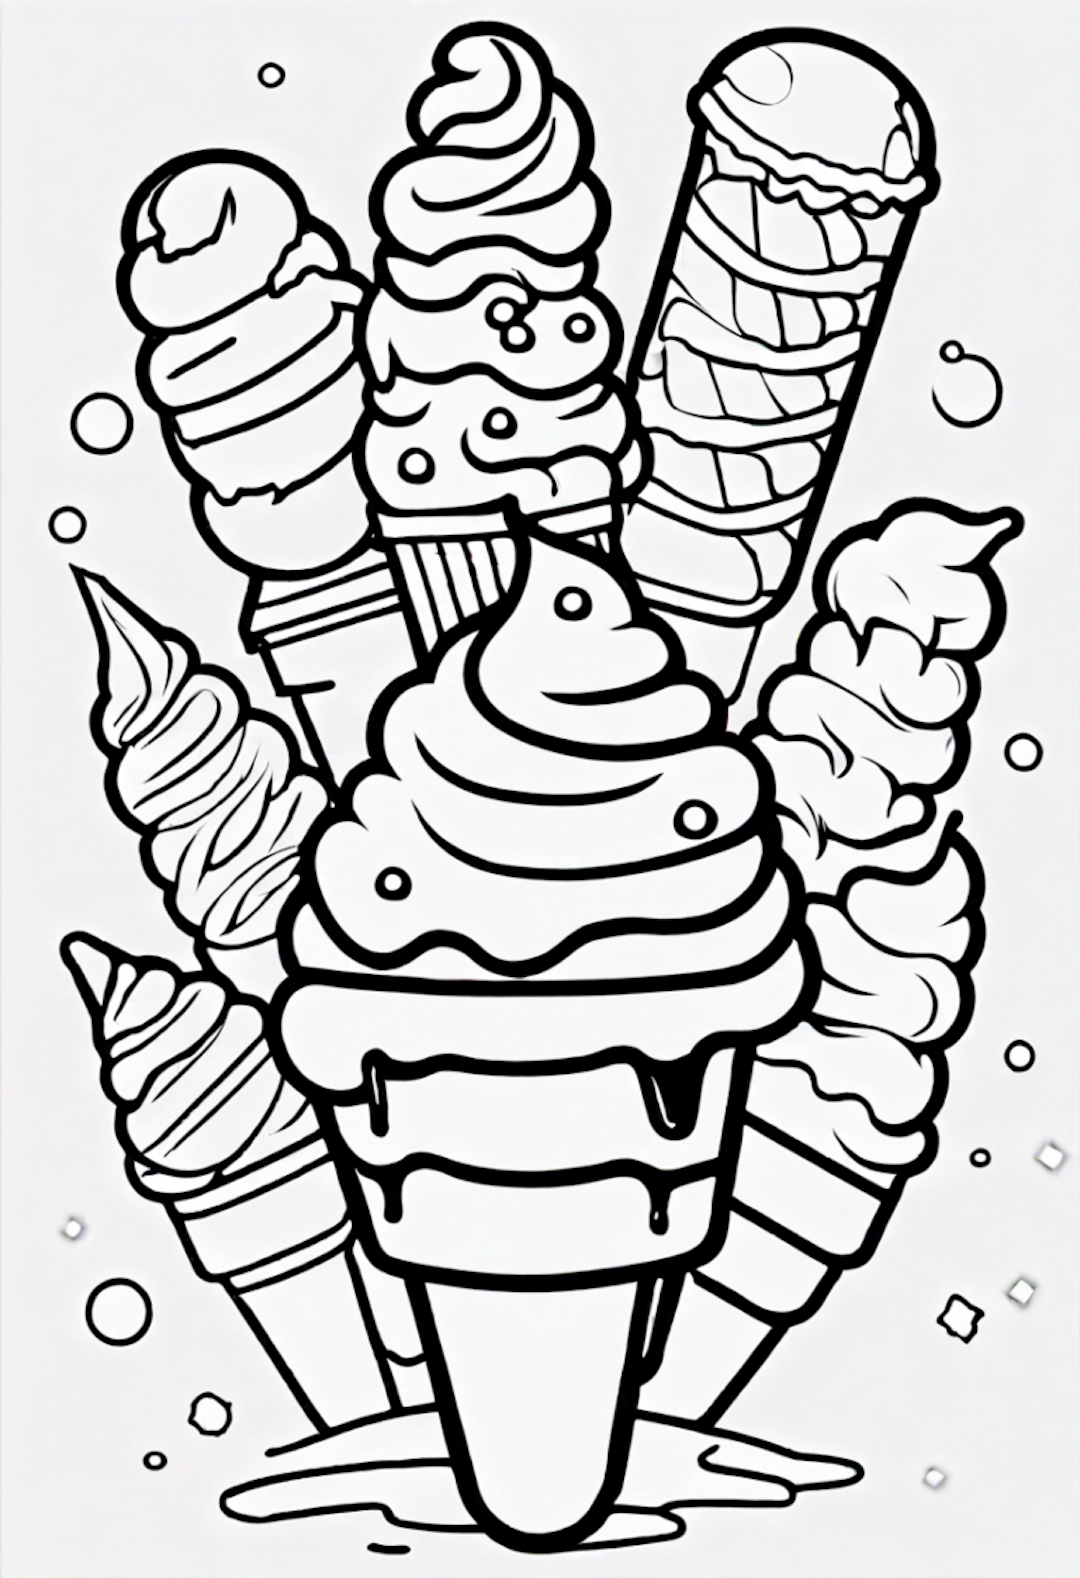 Ice Cream Spectacle coloring pages